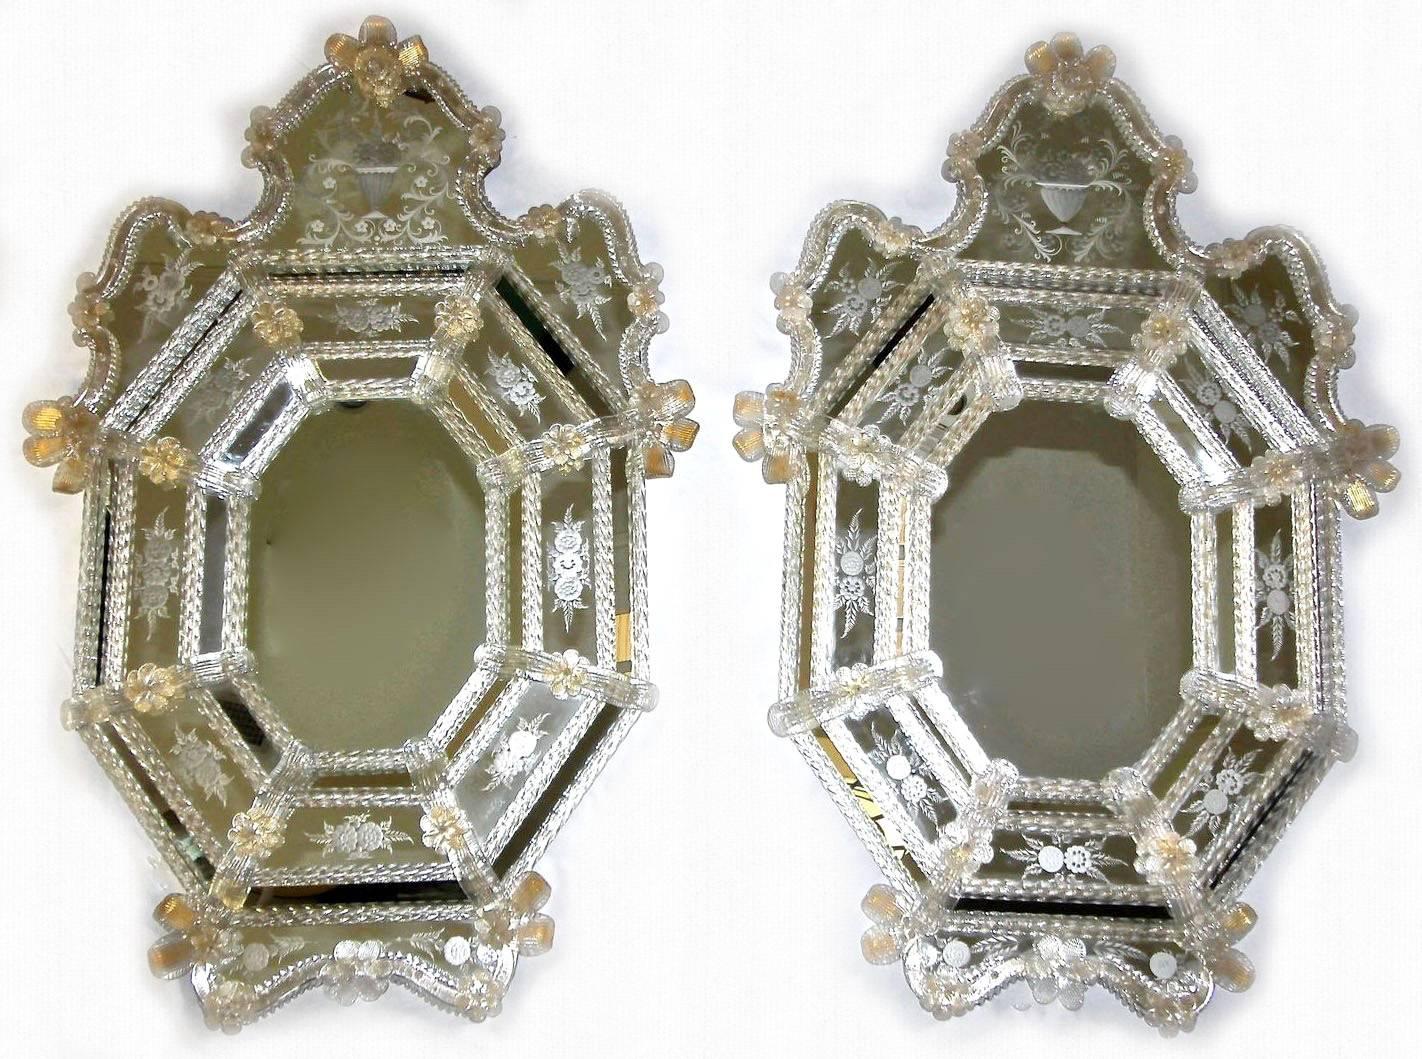 Outstanding pair of Venetian (Murano) Italian wall mirrors with clear and gold inclusion flowers and leaves. The mirrors are surrounded with finely twisted glass rods and intricately etched glass detailing.